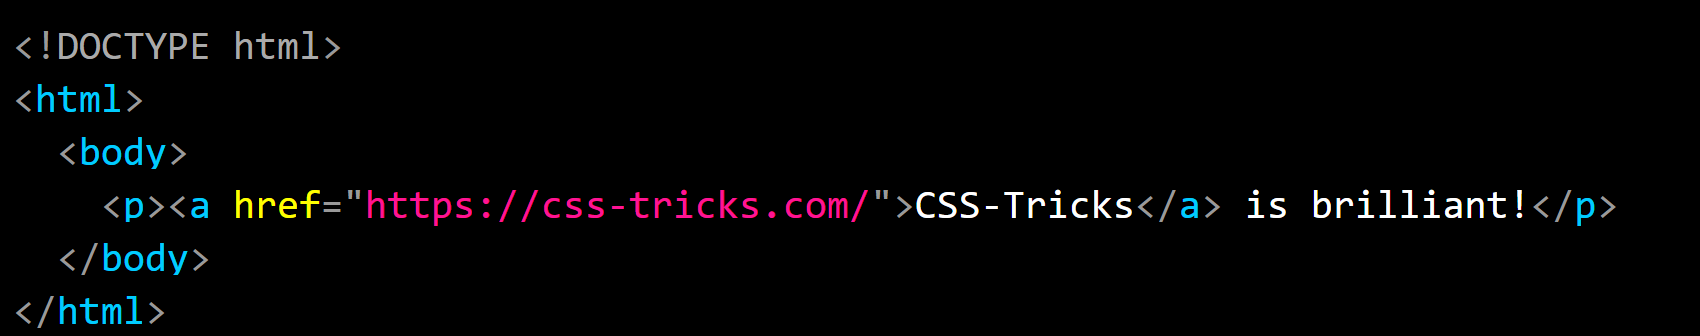 Showing the basic HTML document boilerplate with syntax highlighting on a black background. The body element contains the markup yo a paragraph that contains a link that says "CSS-Tricks is brilliant!"